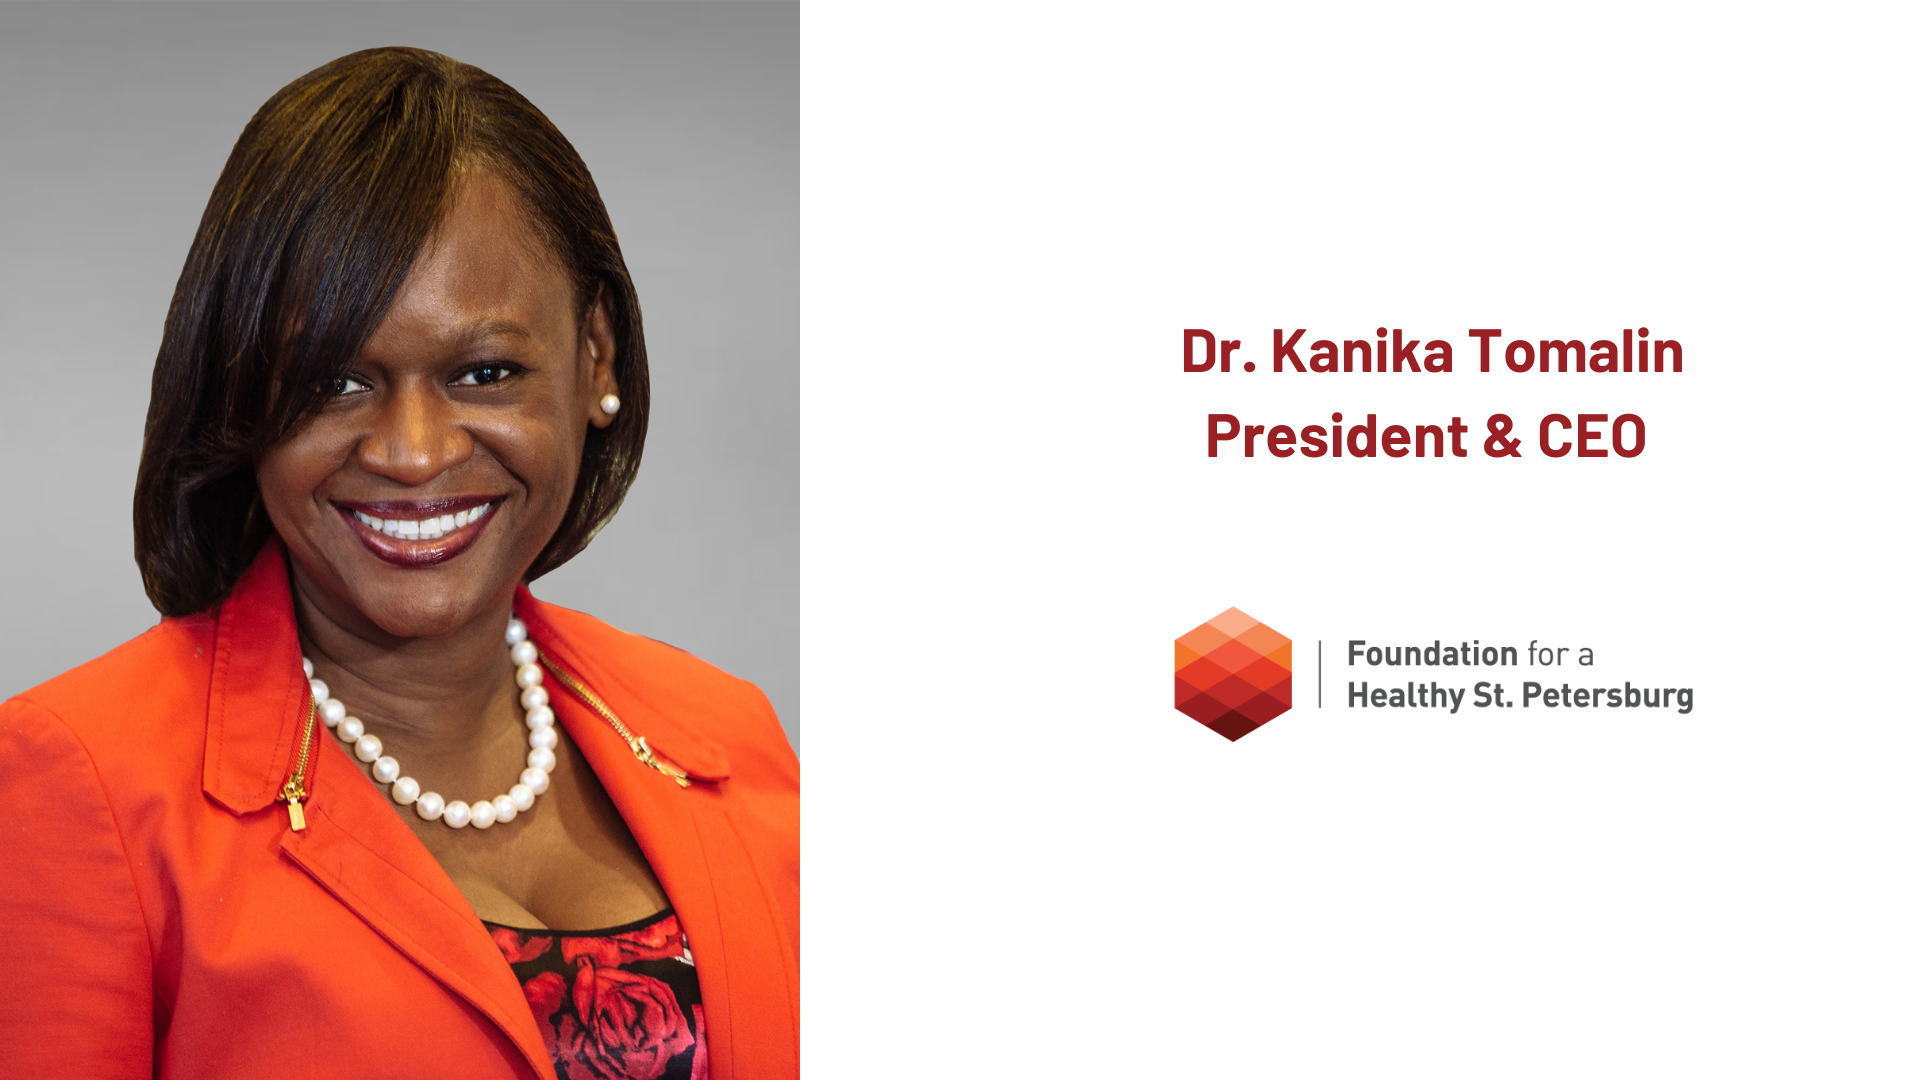 Dr. Kanika Tomalin, President and CEO of the Foundation for a Healthy St. Petersburg